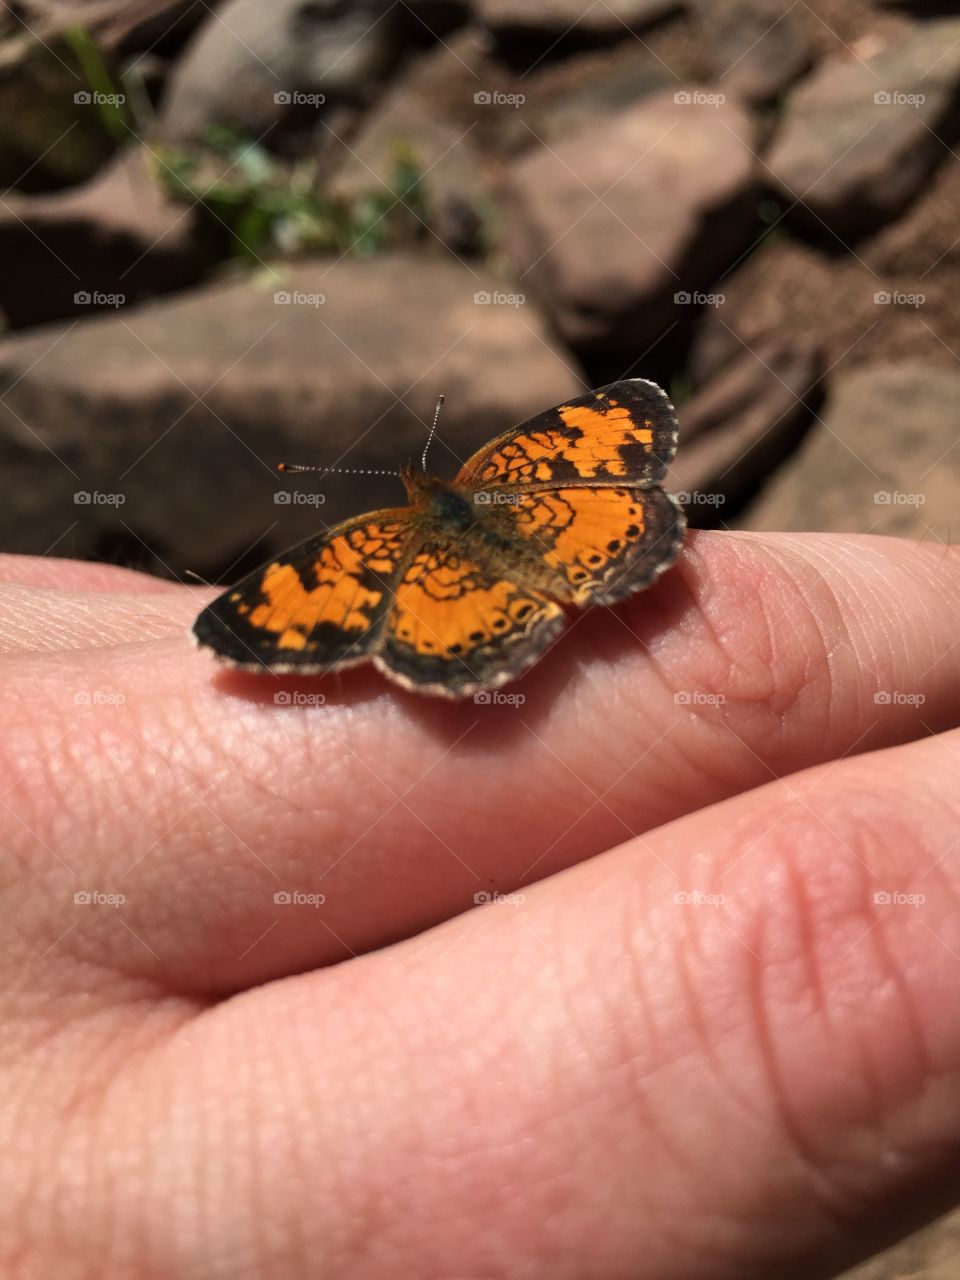 Butterfly. Butterfly on my hand